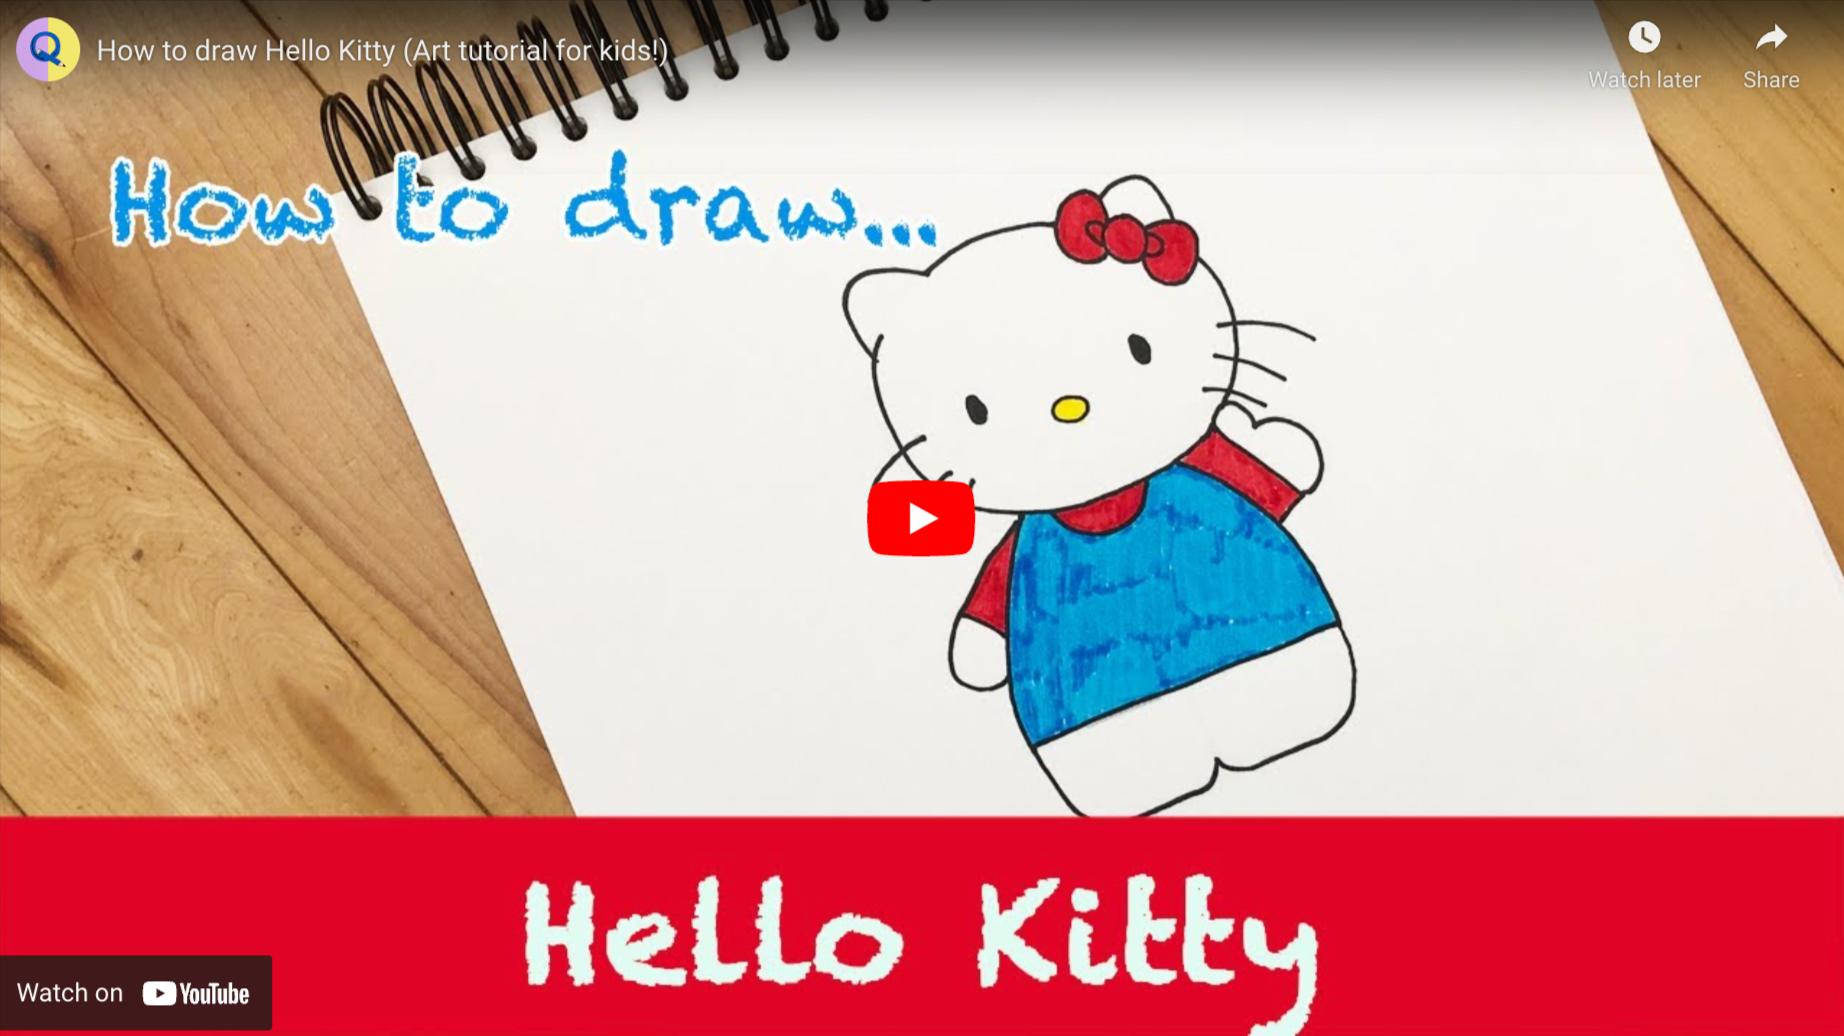 Load video: How to draw Hello Kitty